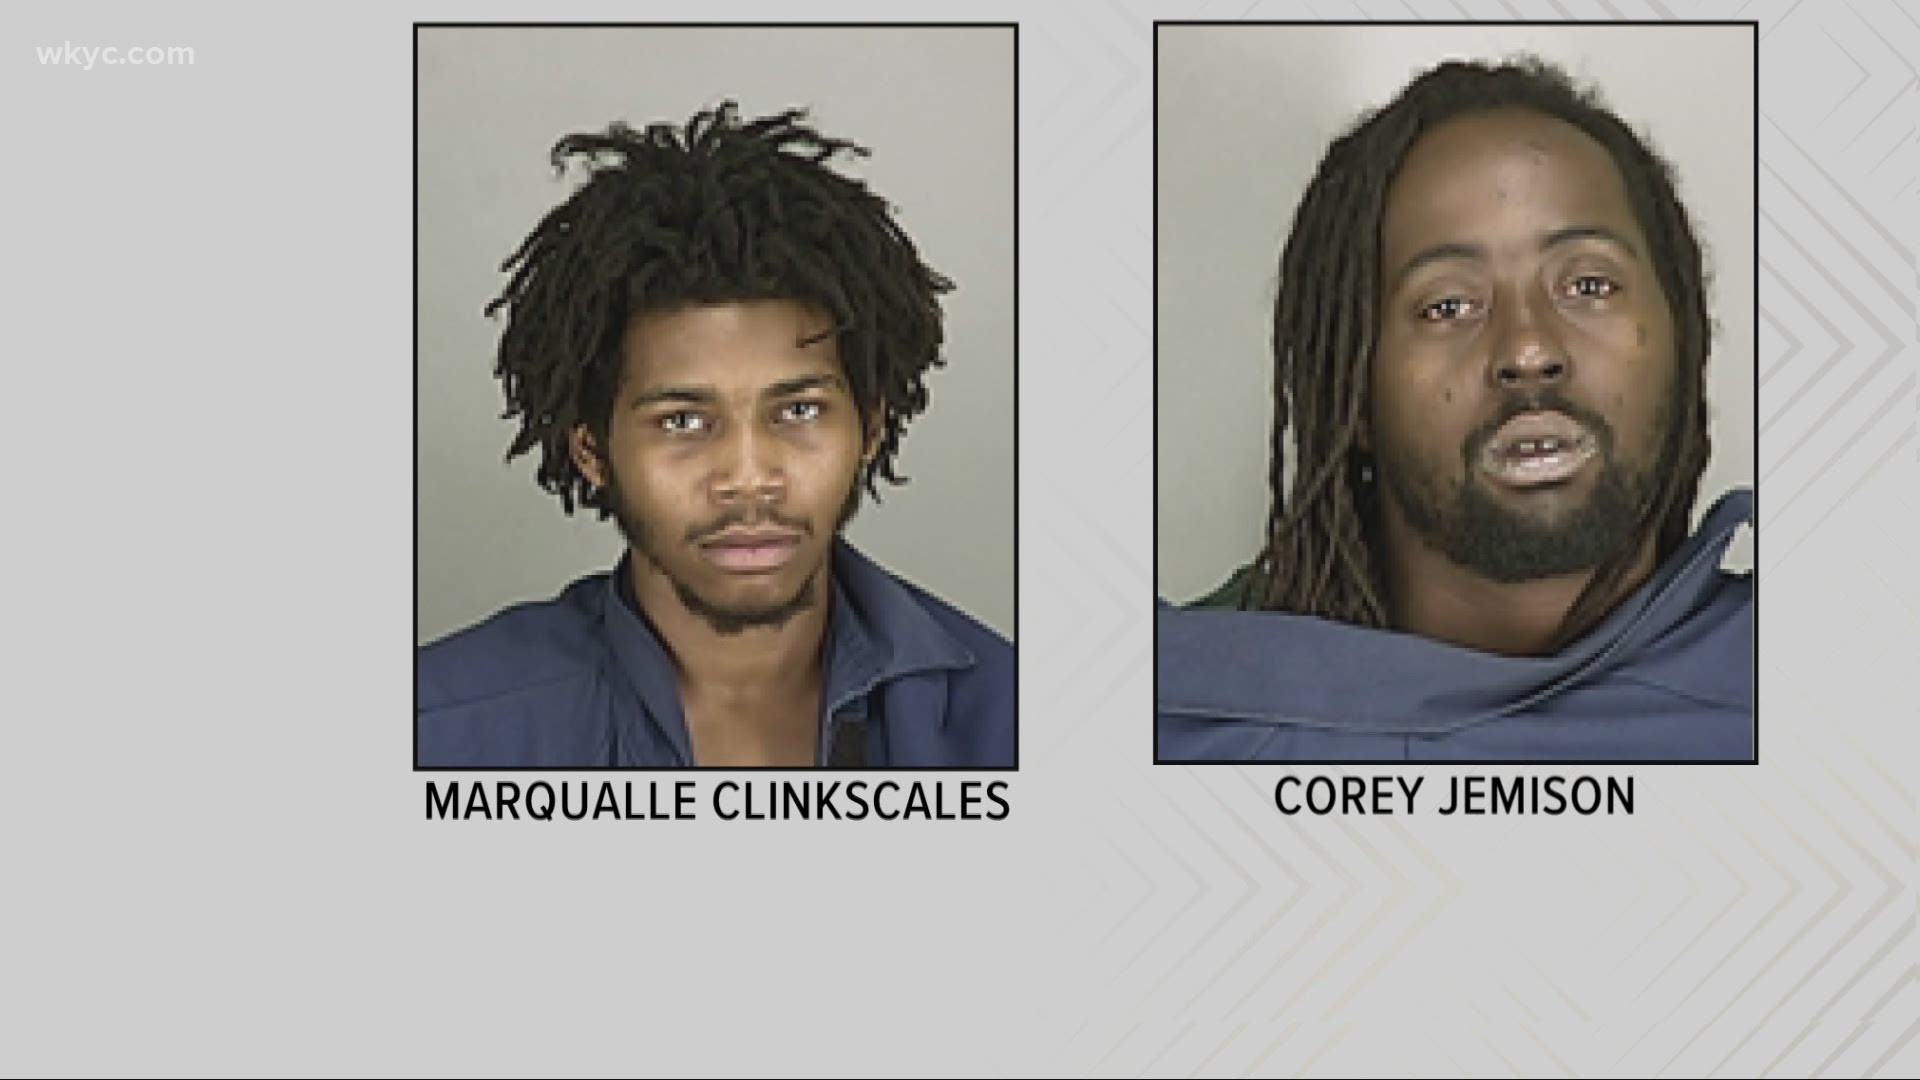 Police say Marqualle Clinkscales, 23, and Corey Jemison, 39, were arrested and charged in connection to the shooting. Another child was grazed by a bullet.